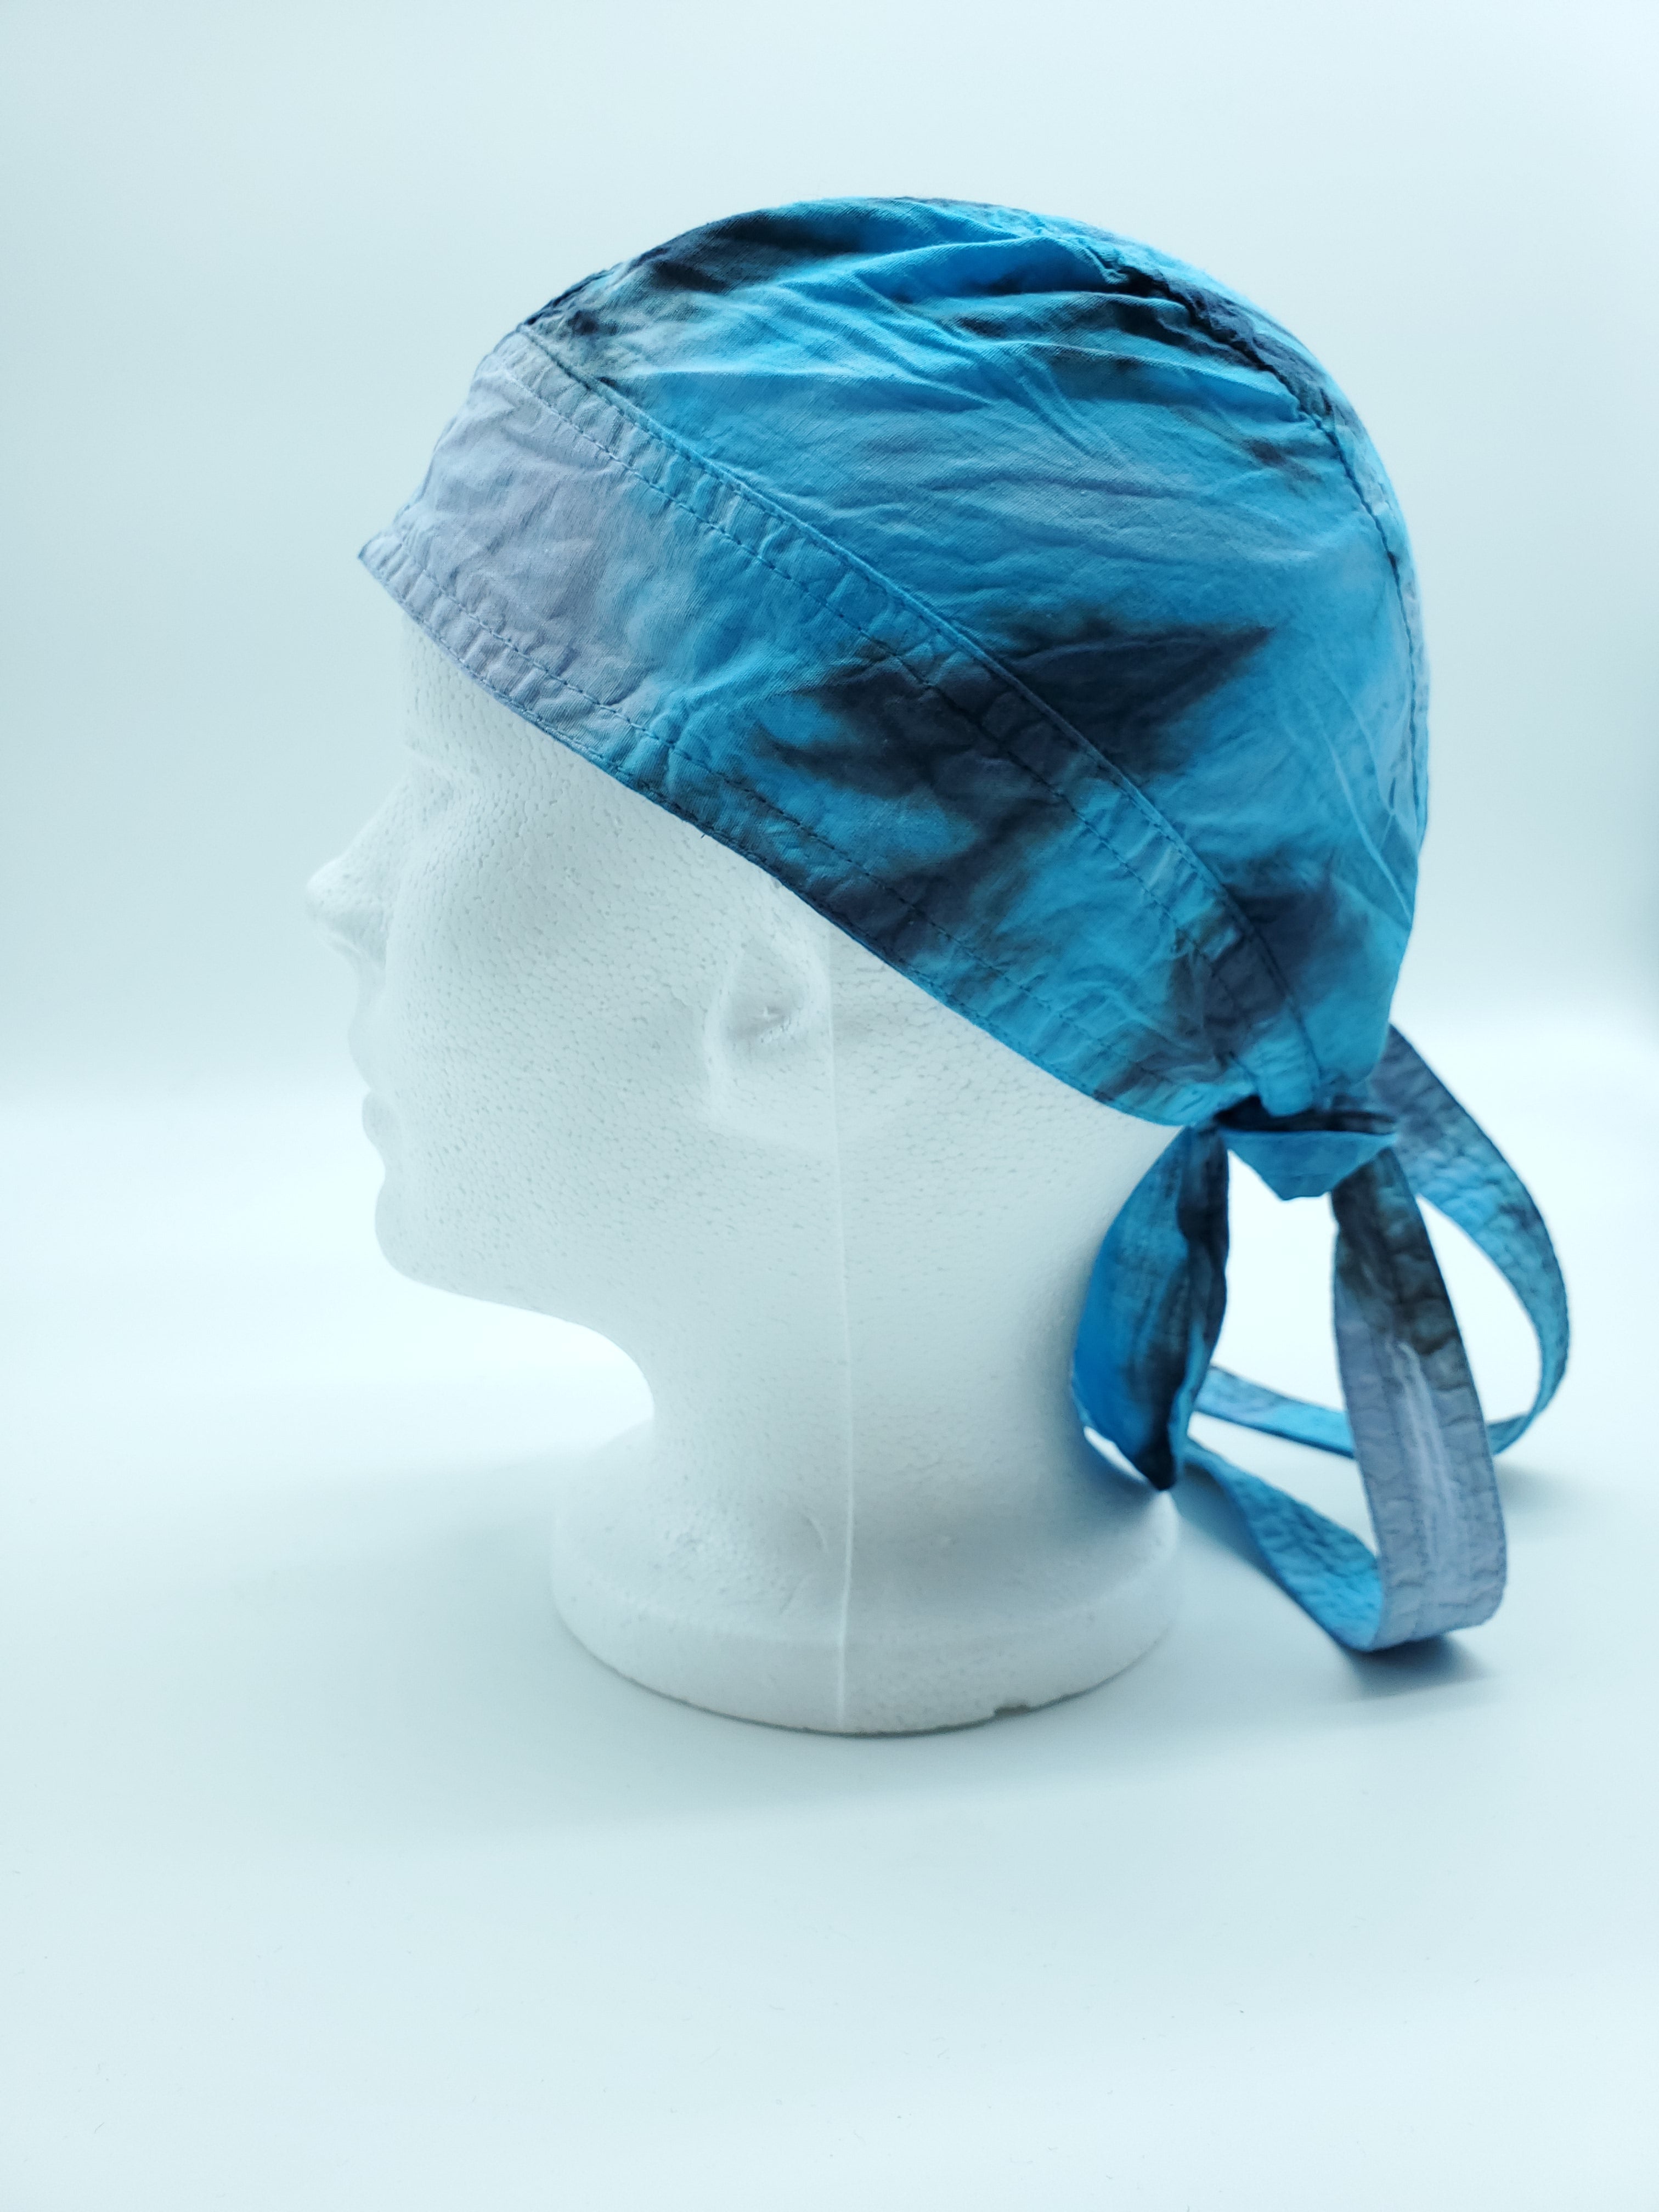 Blue and Black Tie Dyed Kerchief - The Caffeinated Raven